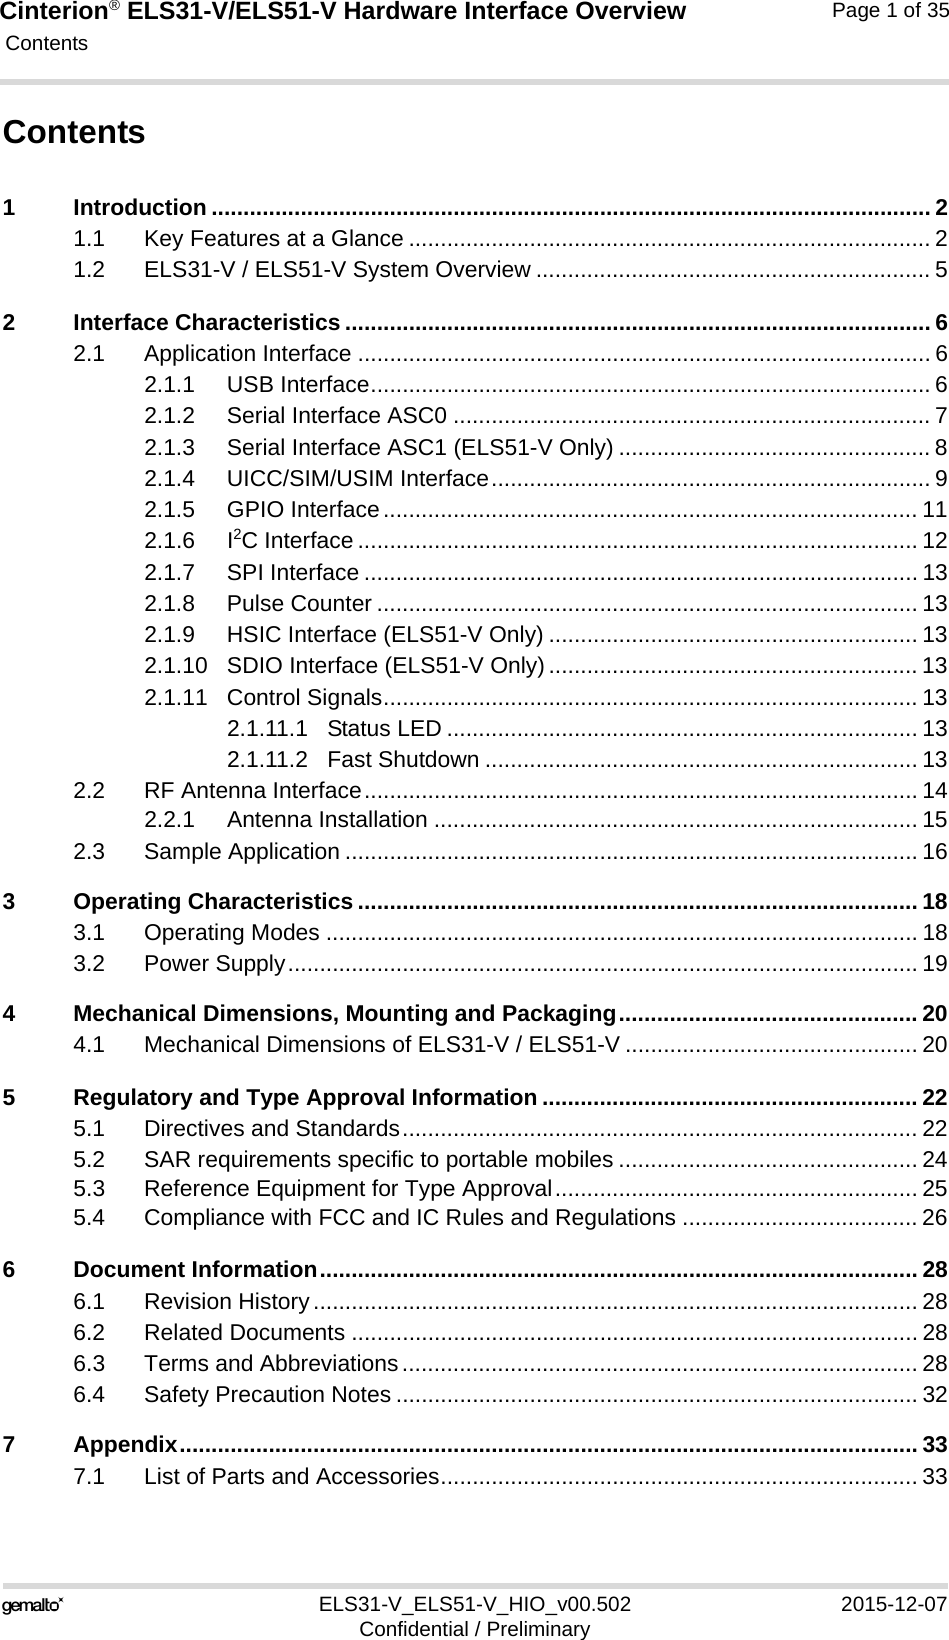 Cinterion® ELS31-V/ELS51-V Hardware Interface Overview Contents35ELS31-V_ELS51-V_HIO_v00.502 2015-12-07Confidential / PreliminaryPage 1 of 35Contents1 Introduction ................................................................................................................. 21.1 Key Features at a Glance .................................................................................. 21.2 ELS31-V / ELS51-V System Overview .............................................................. 52 Interface Characteristics ............................................................................................ 62.1 Application Interface .......................................................................................... 62.1.1 USB Interface........................................................................................ 62.1.2 Serial Interface ASC0 ........................................................................... 72.1.3 Serial Interface ASC1 (ELS51-V Only) ................................................. 82.1.4 UICC/SIM/USIM Interface..................................................................... 92.1.5 GPIO Interface.................................................................................... 112.1.6 I2C Interface ........................................................................................ 122.1.7 SPI Interface ....................................................................................... 132.1.8 Pulse Counter ..................................................................................... 132.1.9 HSIC Interface (ELS51-V Only) .......................................................... 132.1.10 SDIO Interface (ELS51-V Only).......................................................... 132.1.11 Control Signals.................................................................................... 132.1.11.1 Status LED .......................................................................... 132.1.11.2 Fast Shutdown .................................................................... 132.2 RF Antenna Interface....................................................................................... 142.2.1 Antenna Installation ............................................................................ 152.3 Sample Application .......................................................................................... 163 Operating Characteristics ........................................................................................ 183.1 Operating Modes ............................................................................................. 183.2 Power Supply................................................................................................... 194 Mechanical Dimensions, Mounting and Packaging............................................... 204.1 Mechanical Dimensions of ELS31-V / ELS51-V .............................................. 205 Regulatory and Type Approval Information ........................................................... 225.1 Directives and Standards................................................................................. 225.2 SAR requirements specific to portable mobiles ............................................... 245.3 Reference Equipment for Type Approval......................................................... 255.4 Compliance with FCC and IC Rules and Regulations ..................................... 266 Document Information.............................................................................................. 286.1 Revision History............................................................................................... 286.2 Related Documents ......................................................................................... 286.3 Terms and Abbreviations................................................................................. 286.4 Safety Precaution Notes .................................................................................. 327 Appendix.................................................................................................................... 337.1 List of Parts and Accessories........................................................................... 33